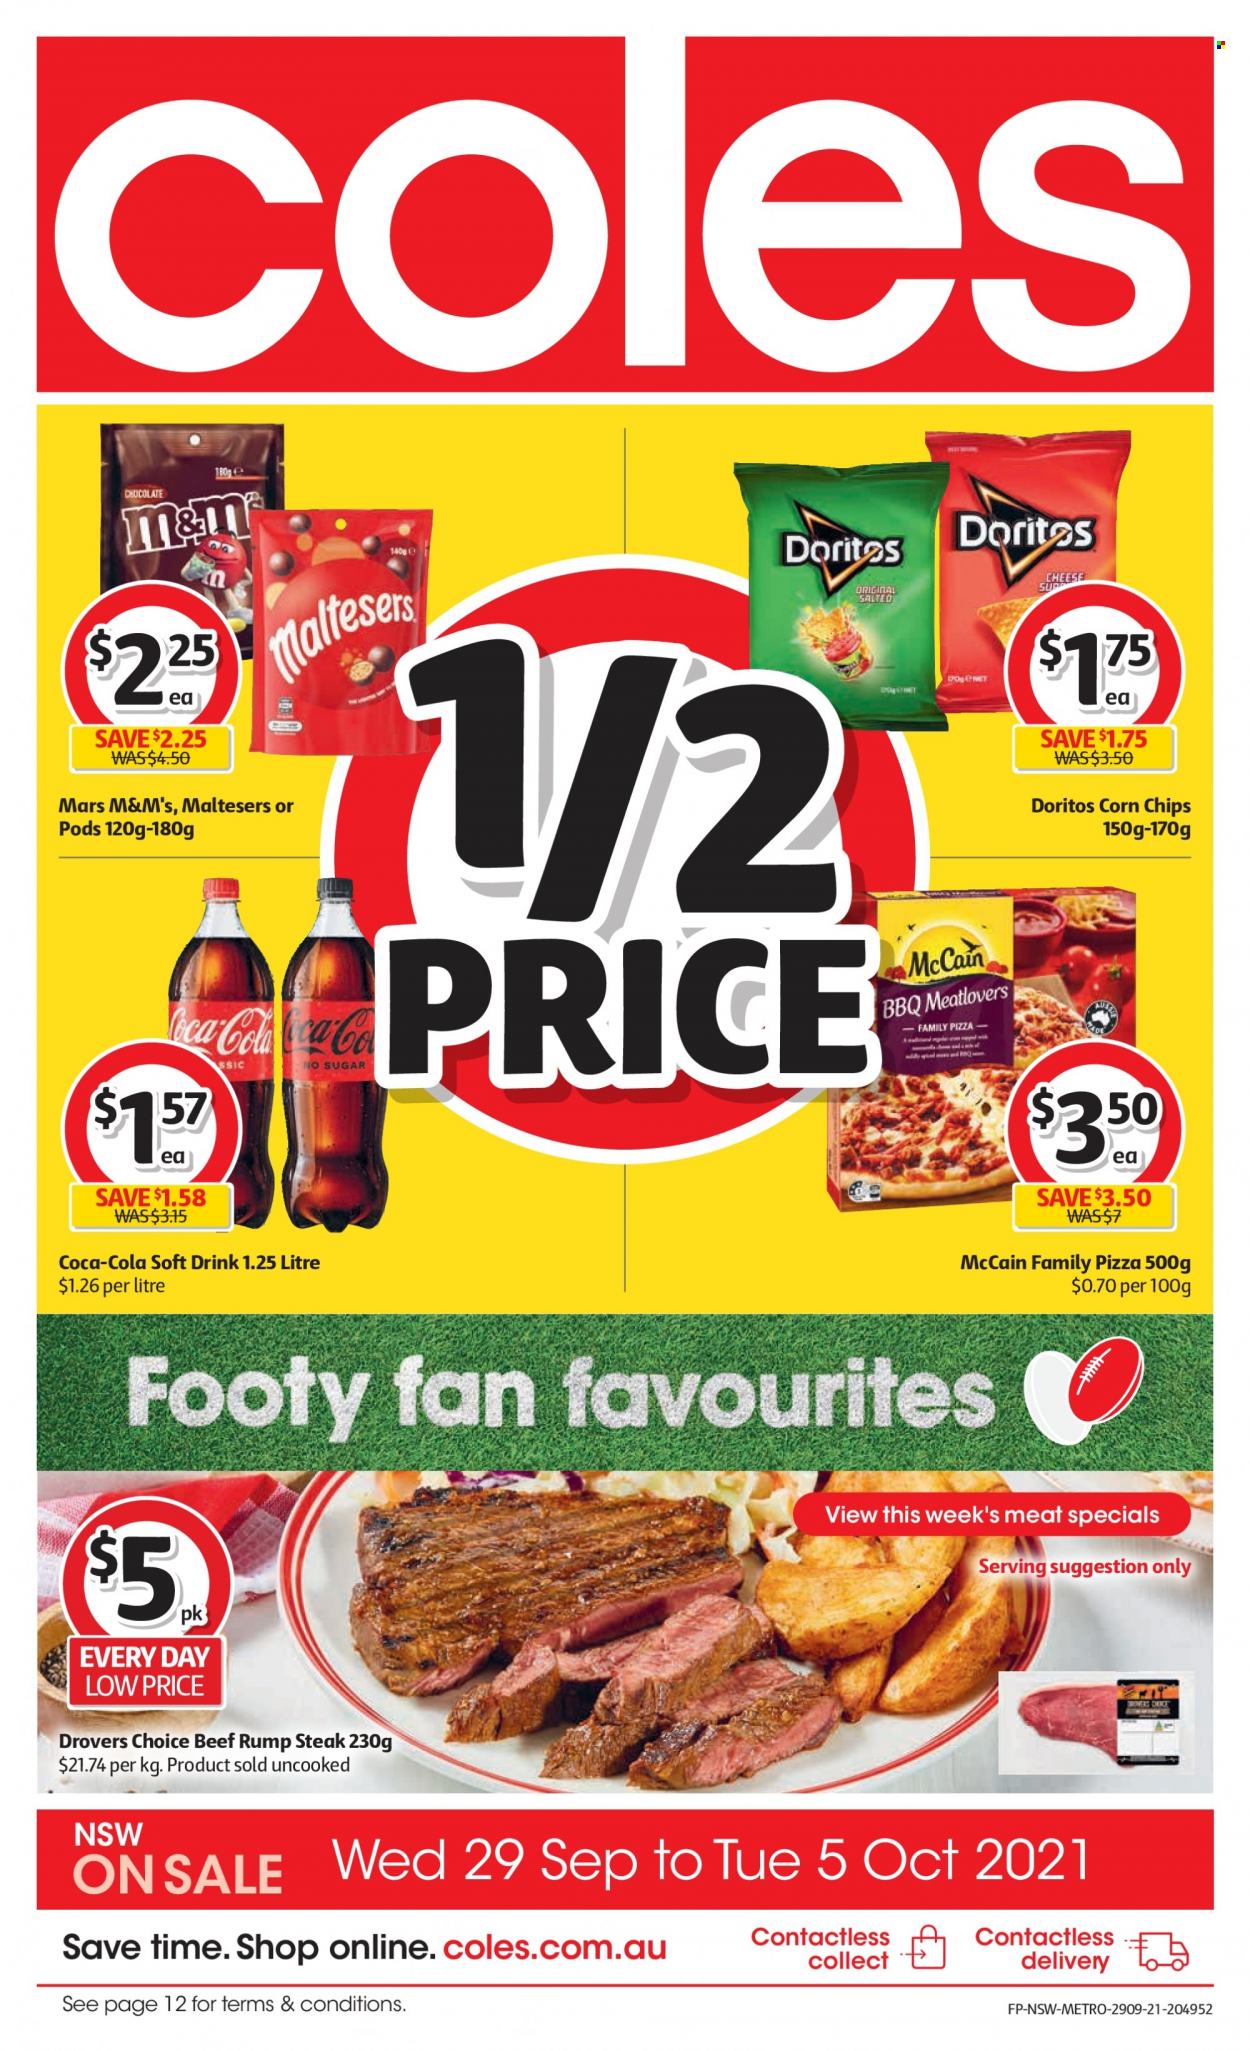 thumbnail - Coles Catalogue - 29 Sep 2021 - 5 Oct 2021 - Sales products - pizza, family pizza, McCain, Mars, M&M's, Maltesers, Doritos, chips, corn chips, Coca-Cola, soft drink, beef meat, steak, rump steak. Page 1.